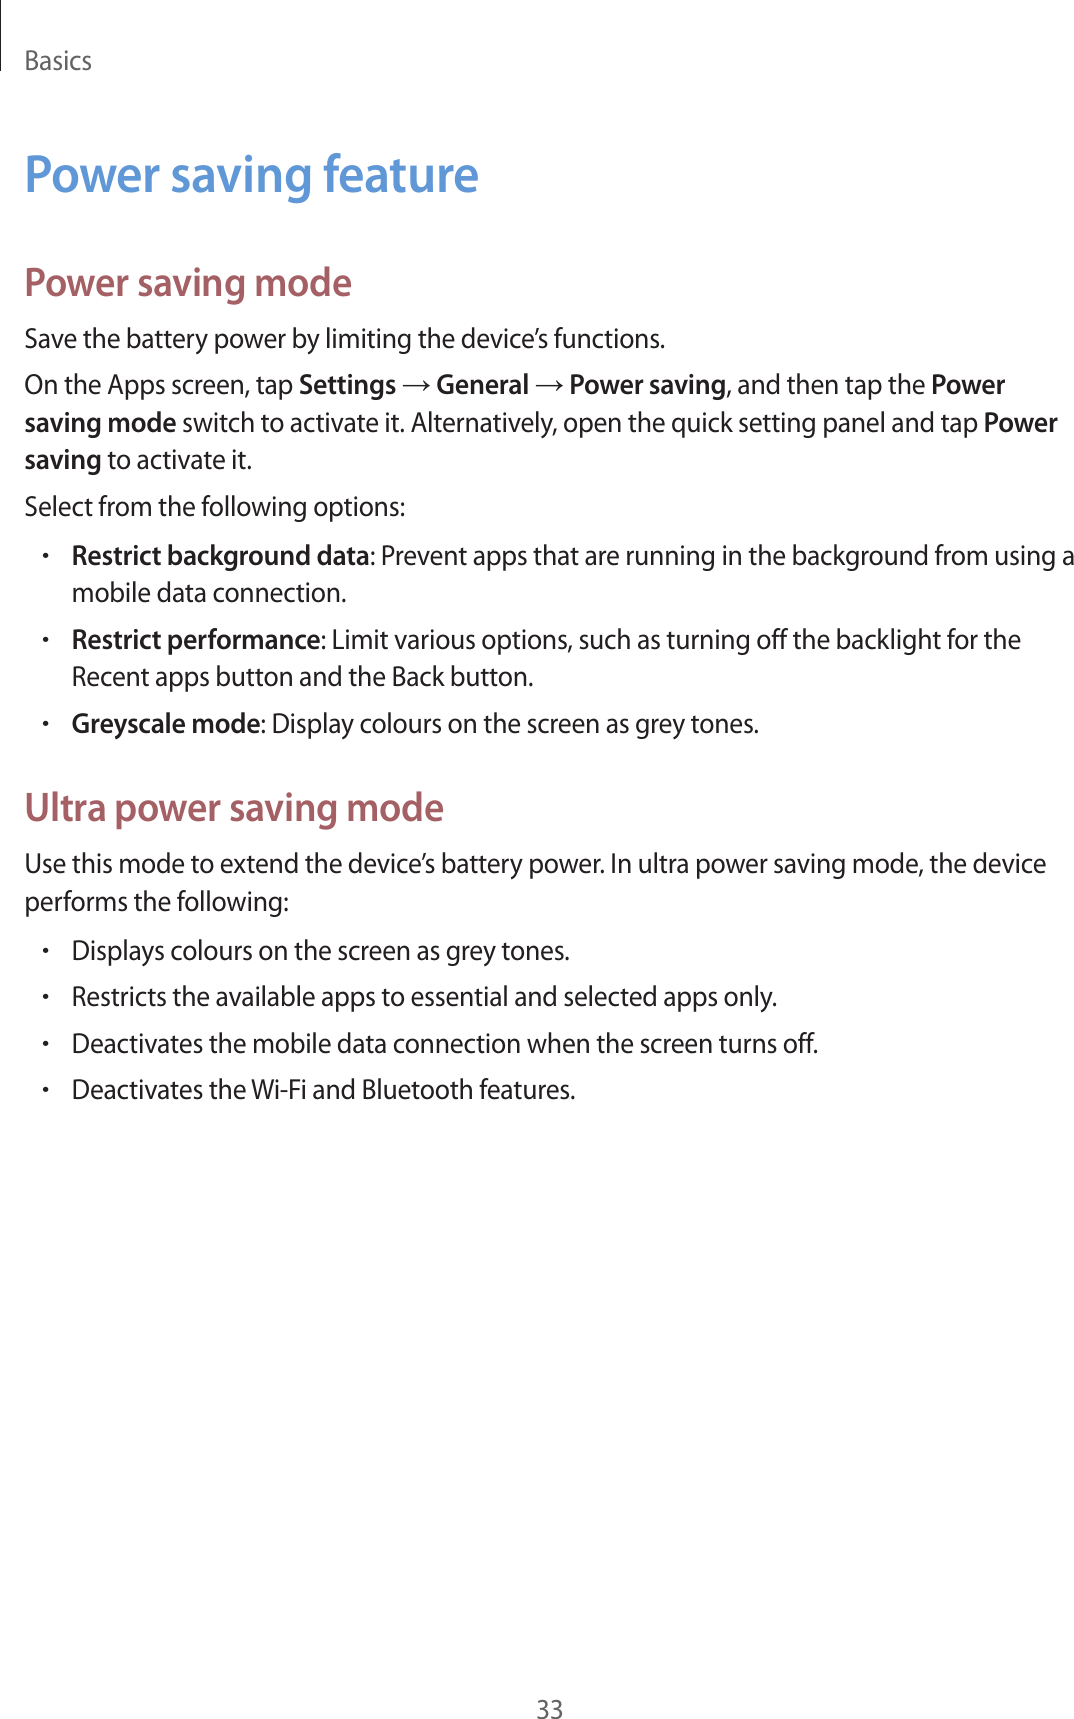 Basics33Power saving featurePower saving modeSave the battery power by limiting the device’s functions.On the Apps screen, tap Settings → General → Power saving, and then tap the Power saving mode switch to activate it. Alternatively, open the quick setting panel and tap Power saving to activate it.Select from the following options:•Restrict background data: Prevent apps that are running in the background from using a mobile data connection.•Restrict performance: Limit various options, such as turning off the backlight for the Recent apps button and the Back button.•Greyscale mode: Display colours on the screen as grey tones.Ultra power saving modeUse this mode to extend the device’s battery power. In ultra power saving mode, the device performs the following:•Displays colours on the screen as grey tones.•Restricts the available apps to essential and selected apps only.•Deactivates the mobile data connection when the screen turns off.•Deactivates the Wi-Fi and Bluetooth features.